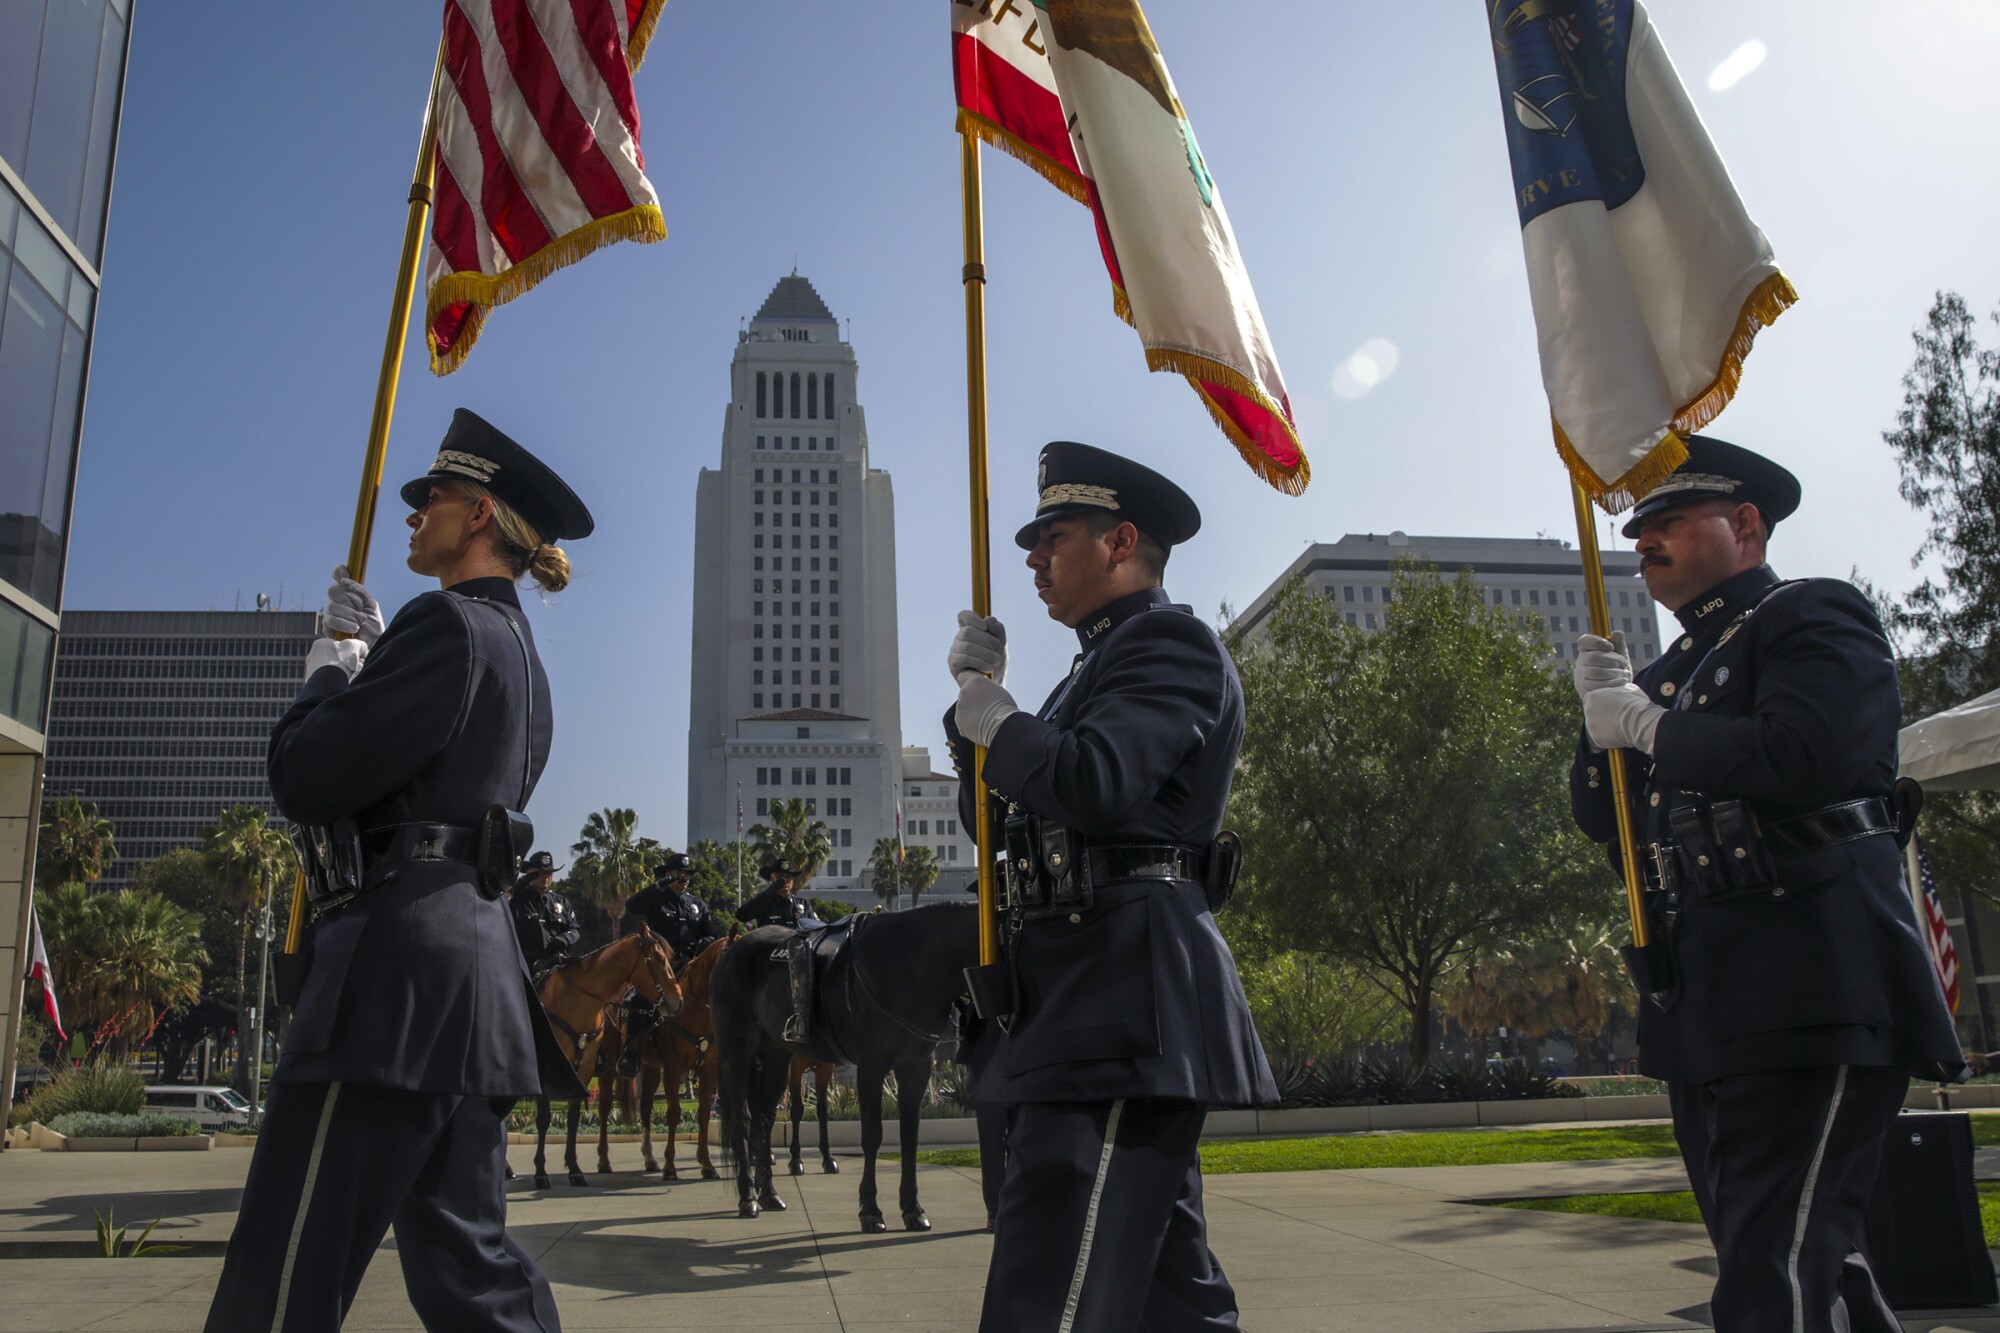 LAPD color guard at the memorial ceremony